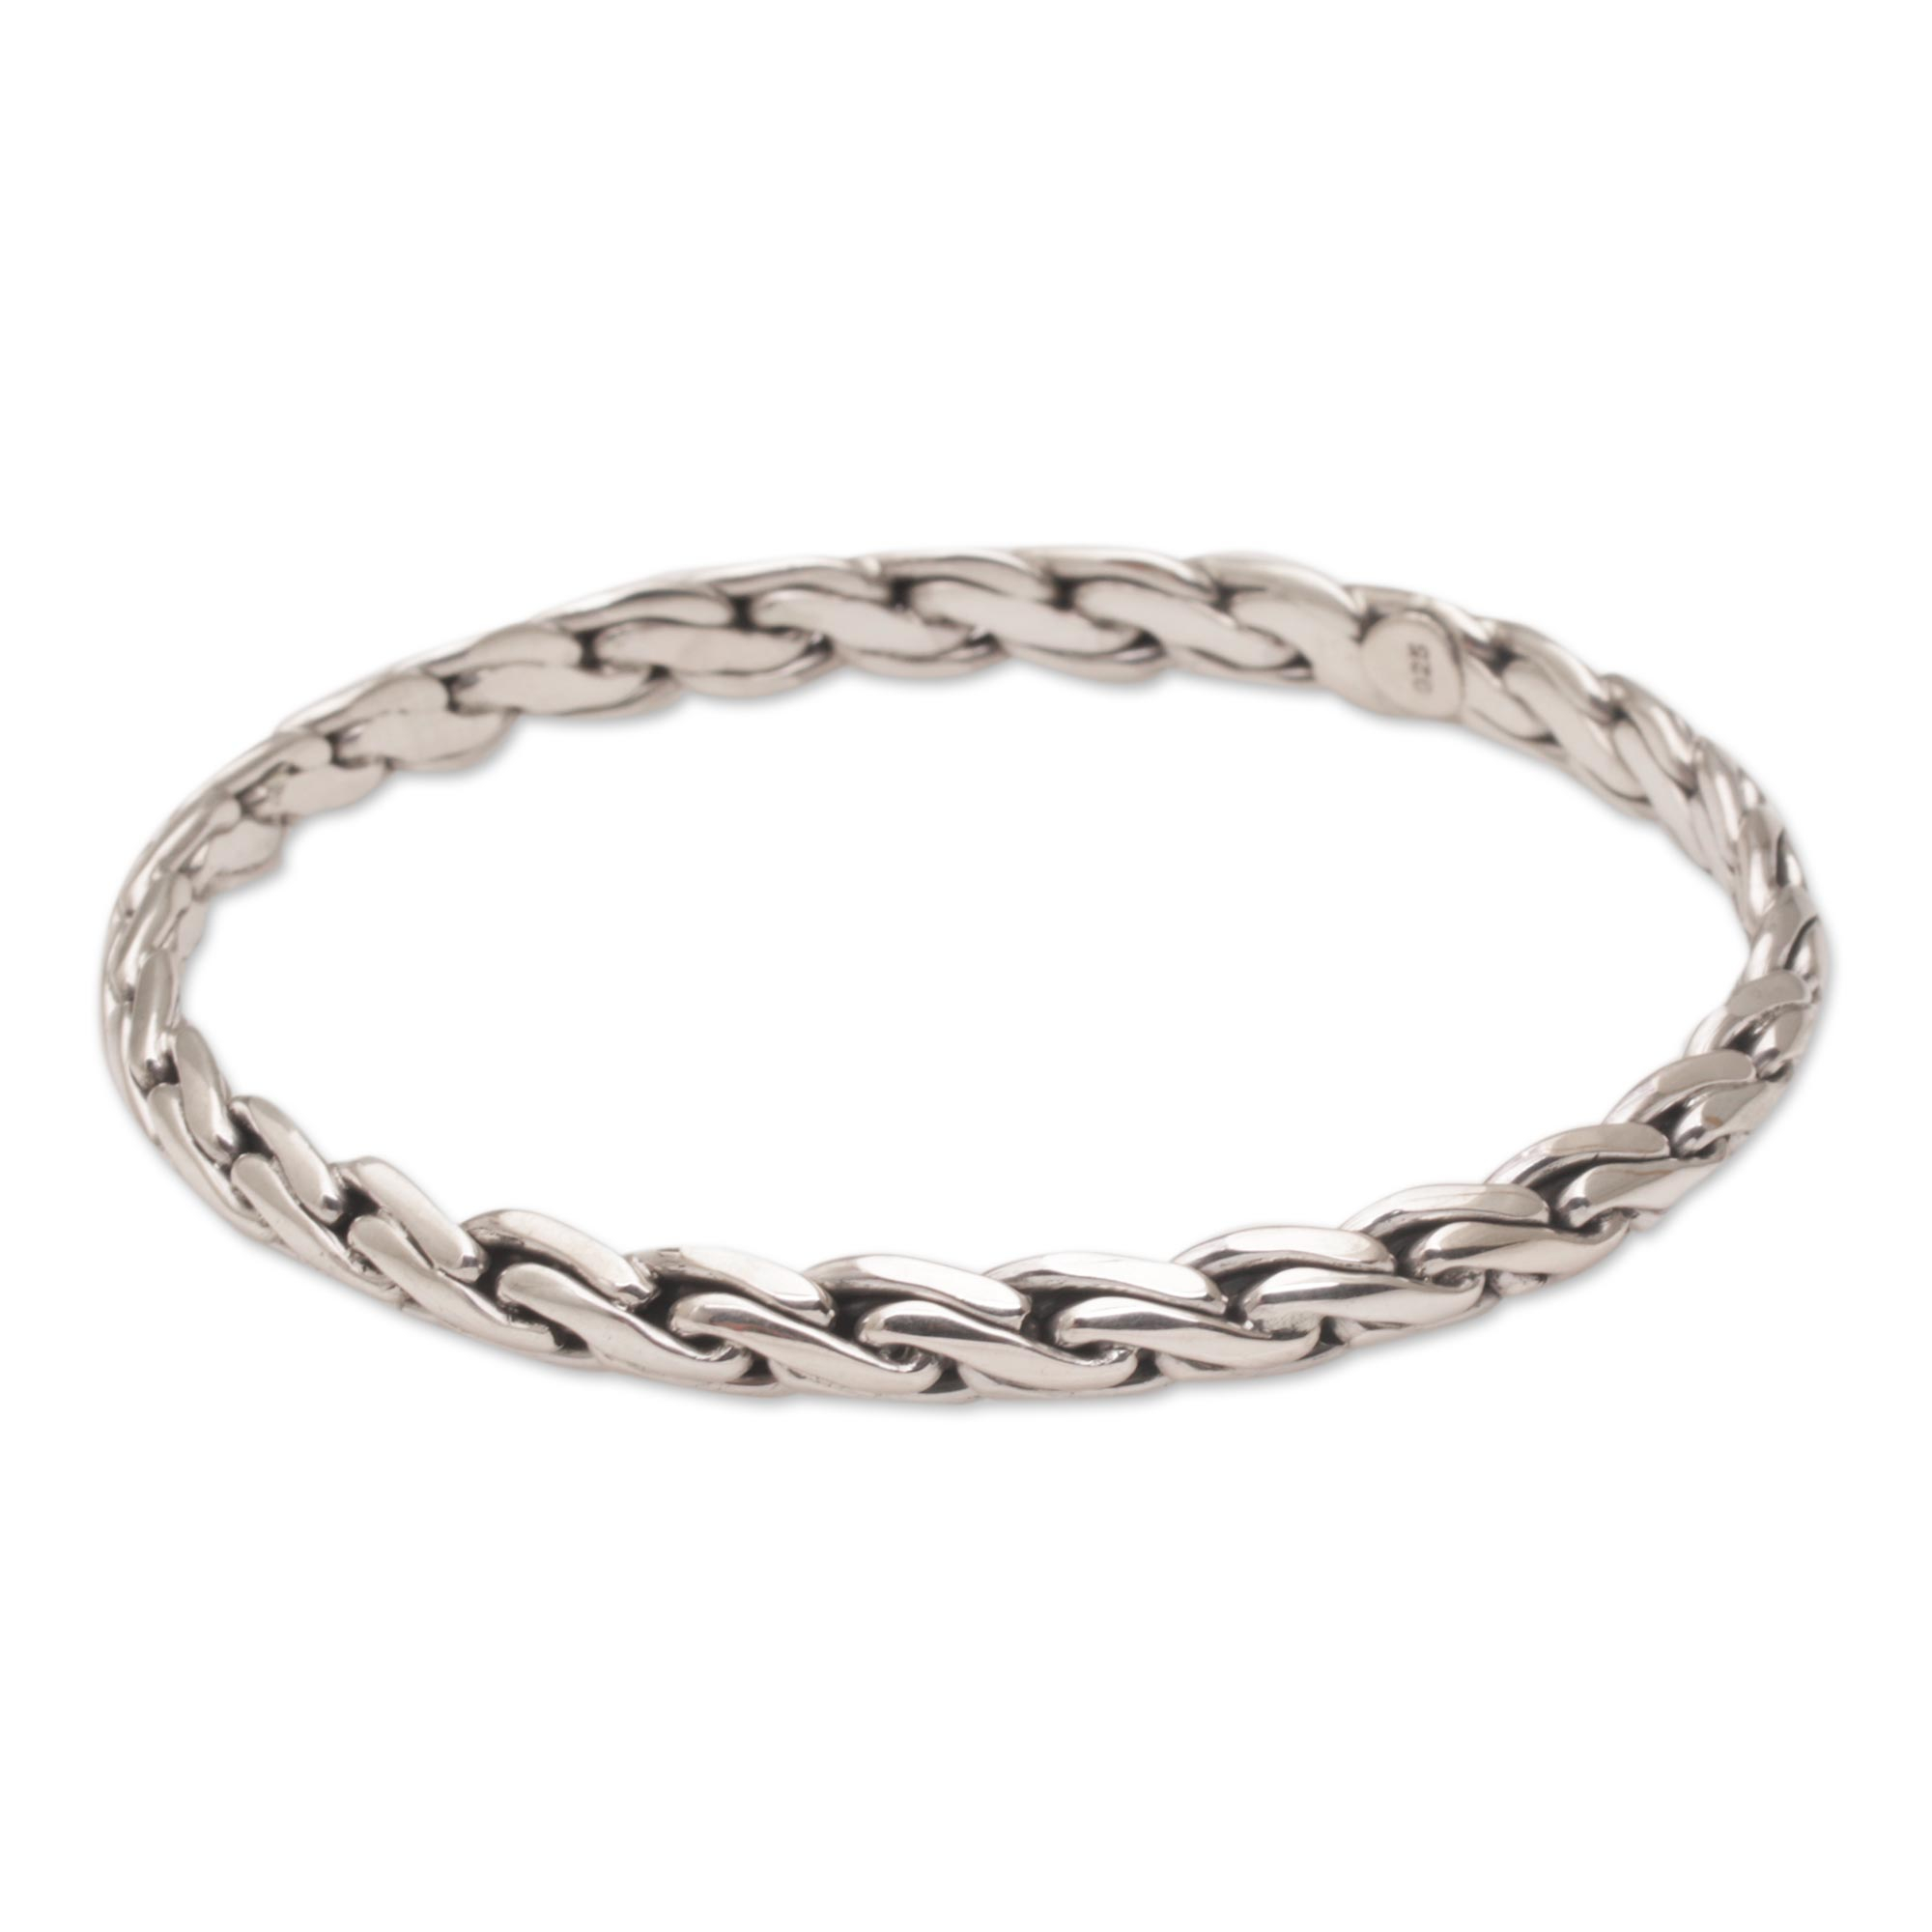 Sterling Silver Bangle Bracelet with Chain-Like Look - Chain Link | NOVICA